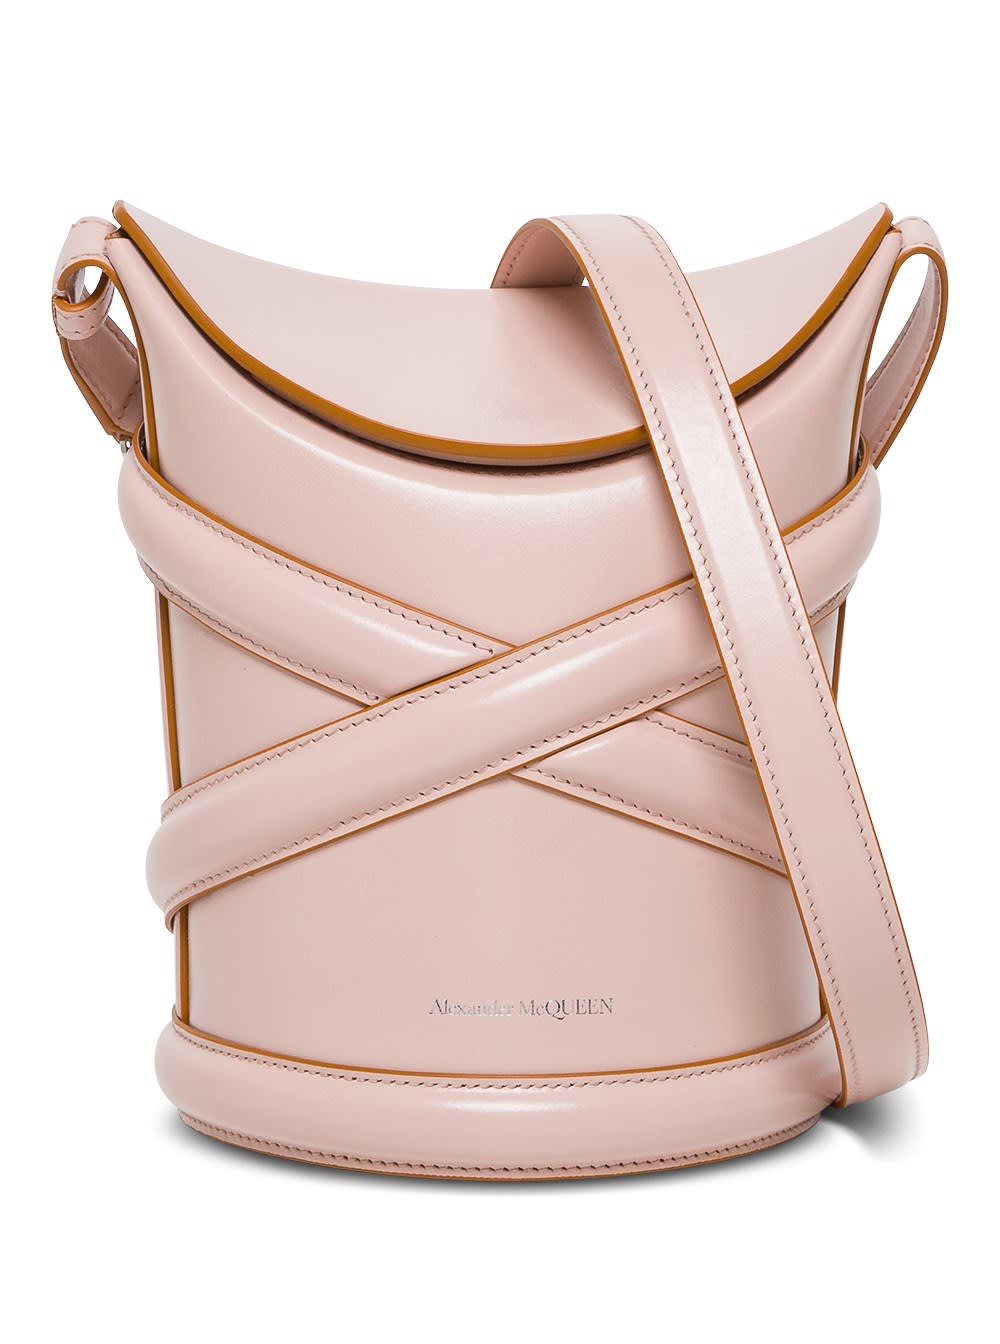 ALEXANDER MCQUEEN THE CURVE CROSSBODY BAG IN PINK LEATHER,6564671YB409900